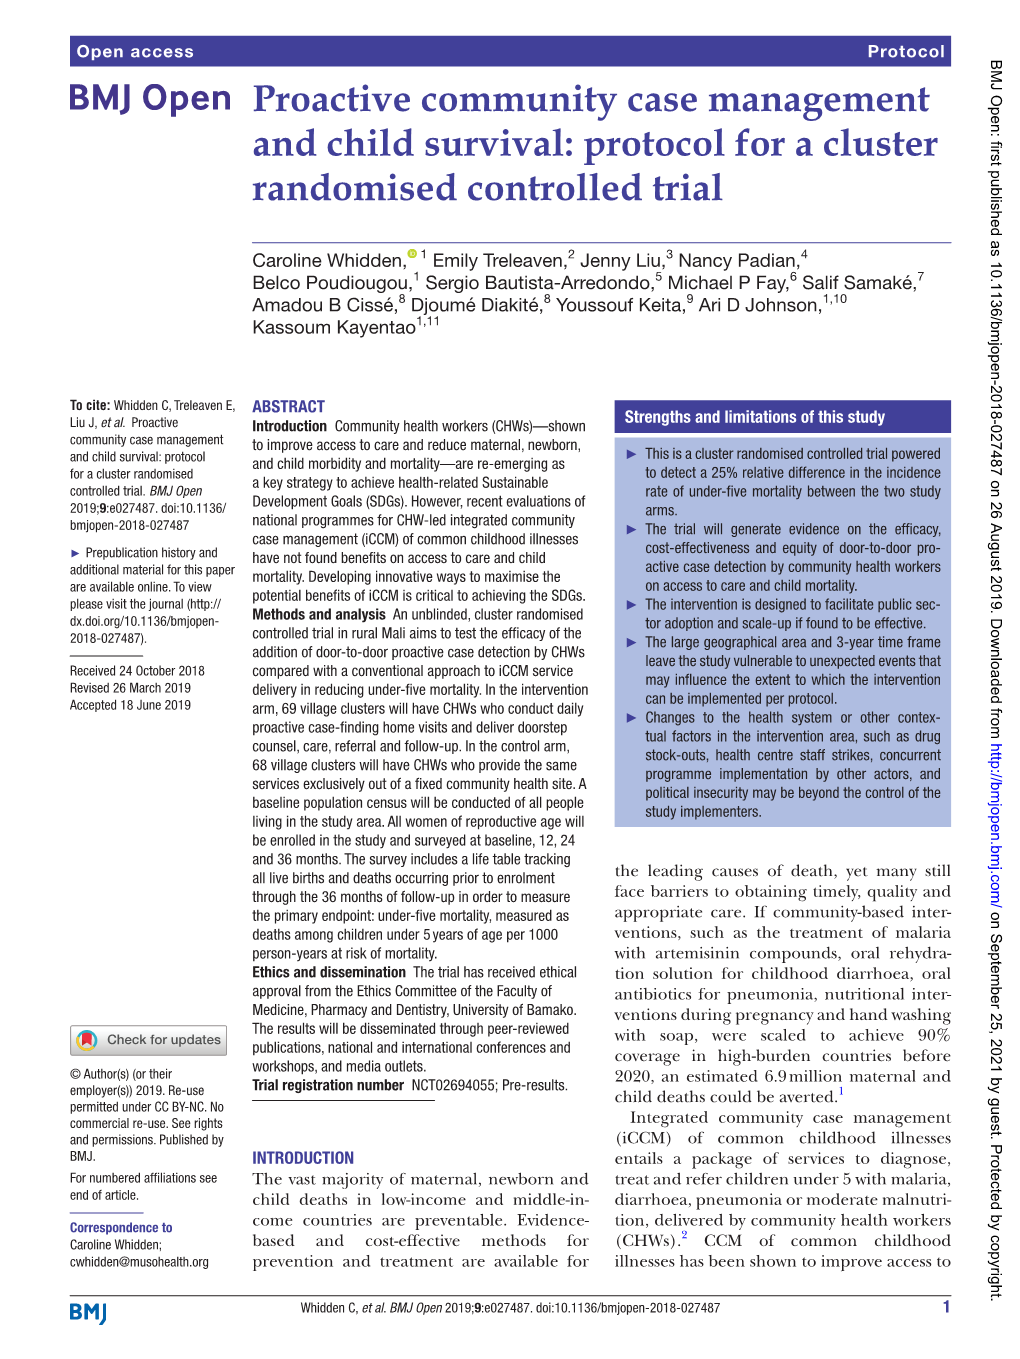 Protocol for a Cluster Randomised Controlled Trial